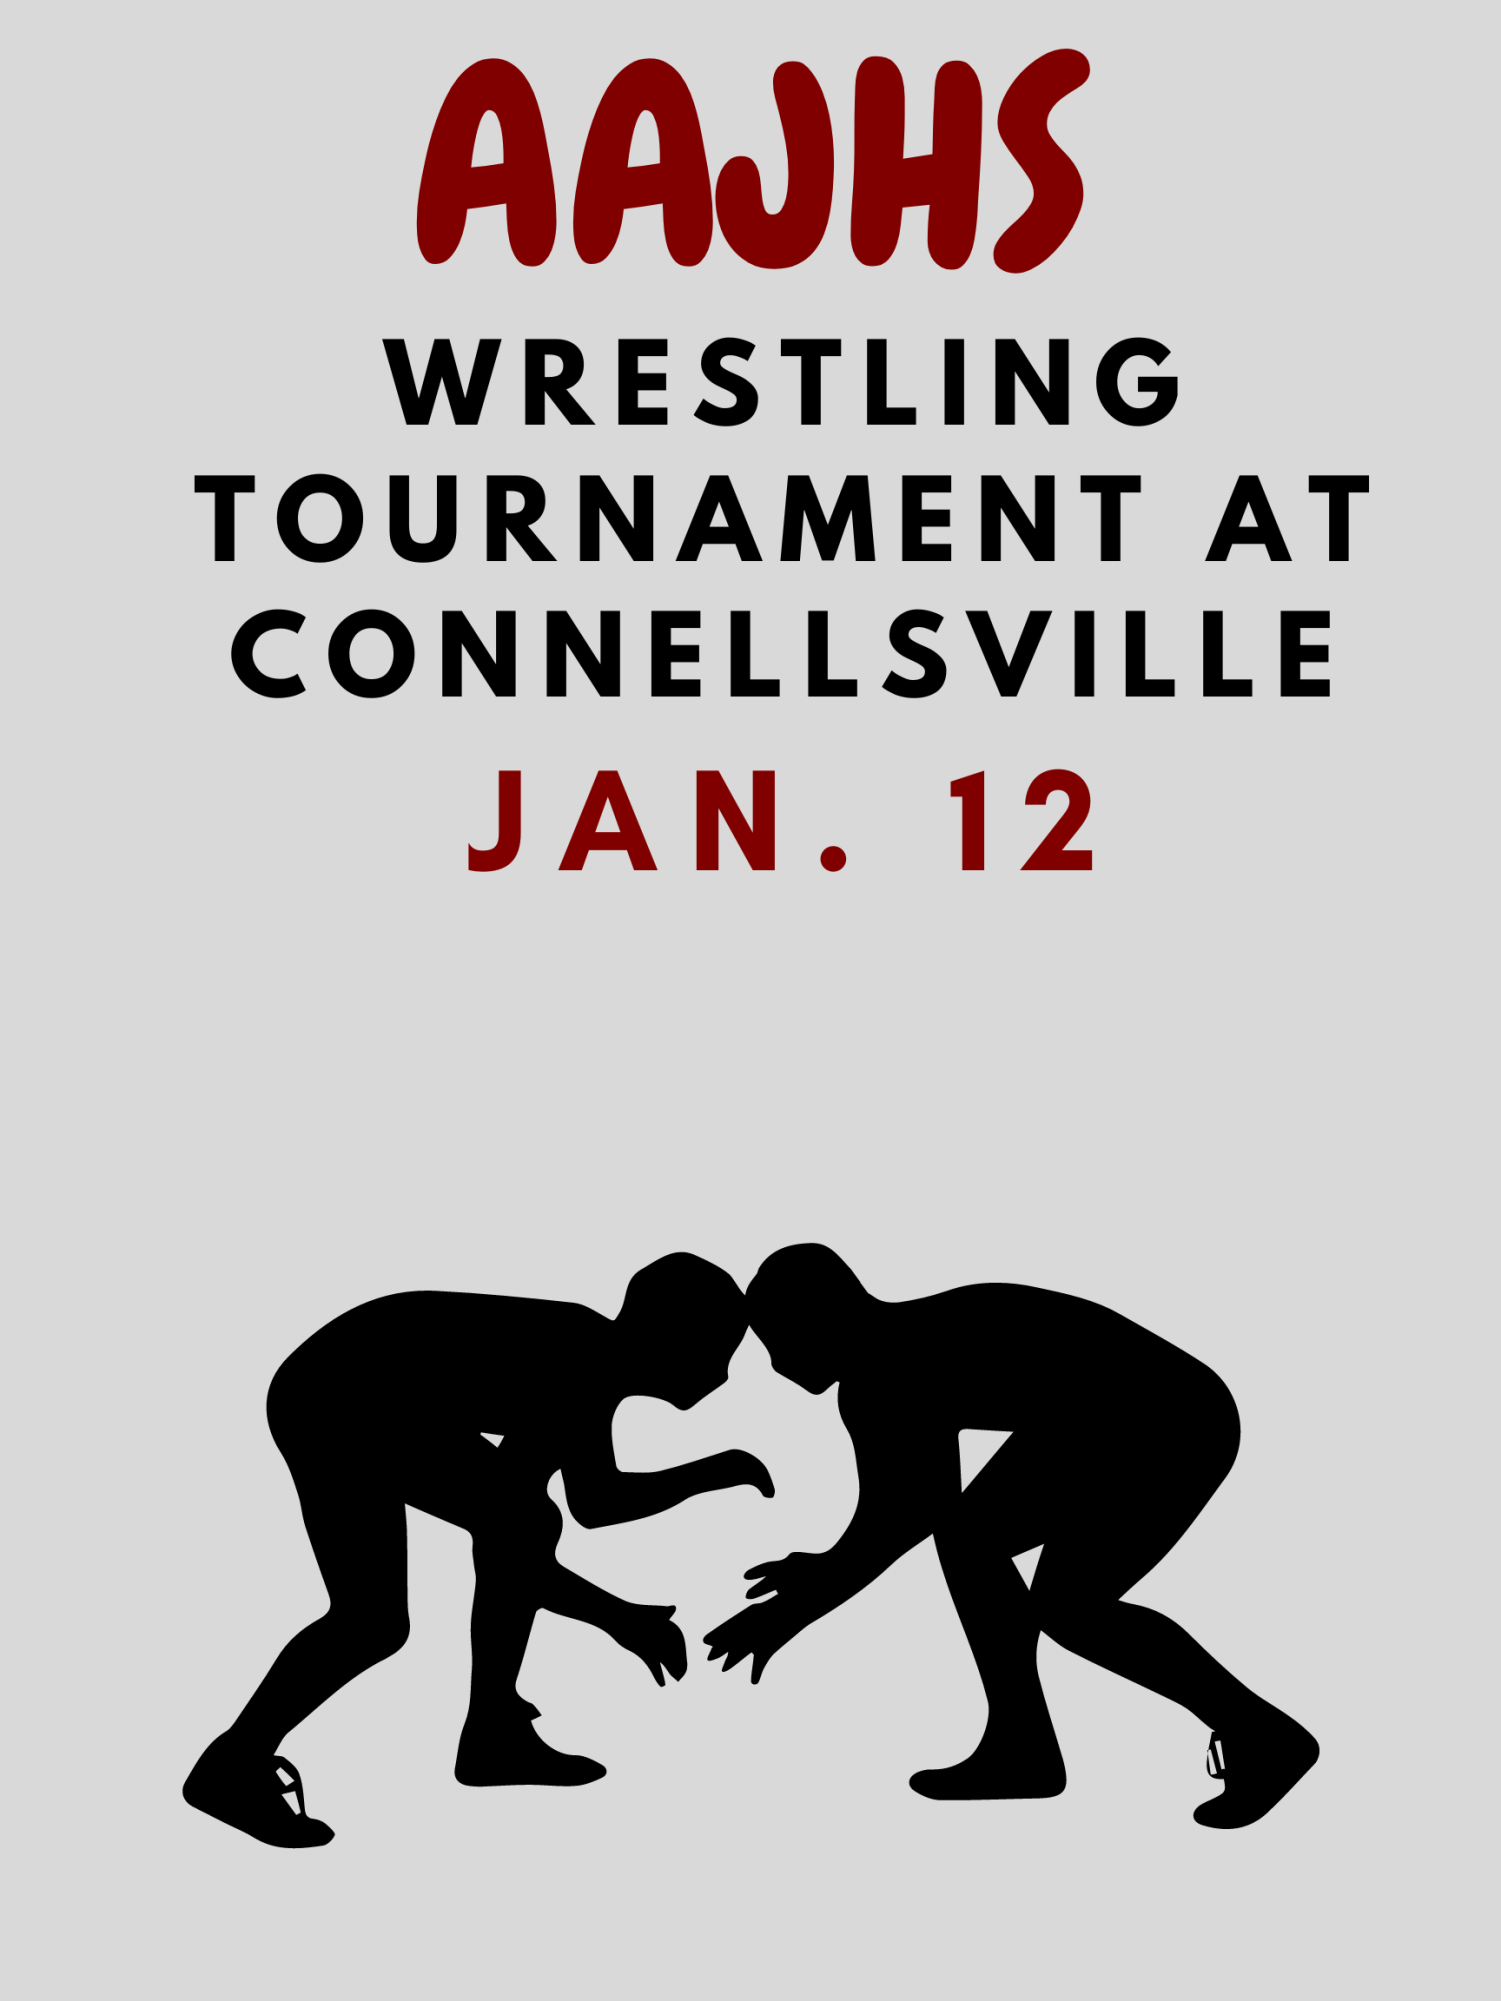 Wrestling! The Altoona wrestling team went to Connellsville for a tournament against five other teams. They won four out of the five matches they wrestled that day, taking home the first place trophy. 